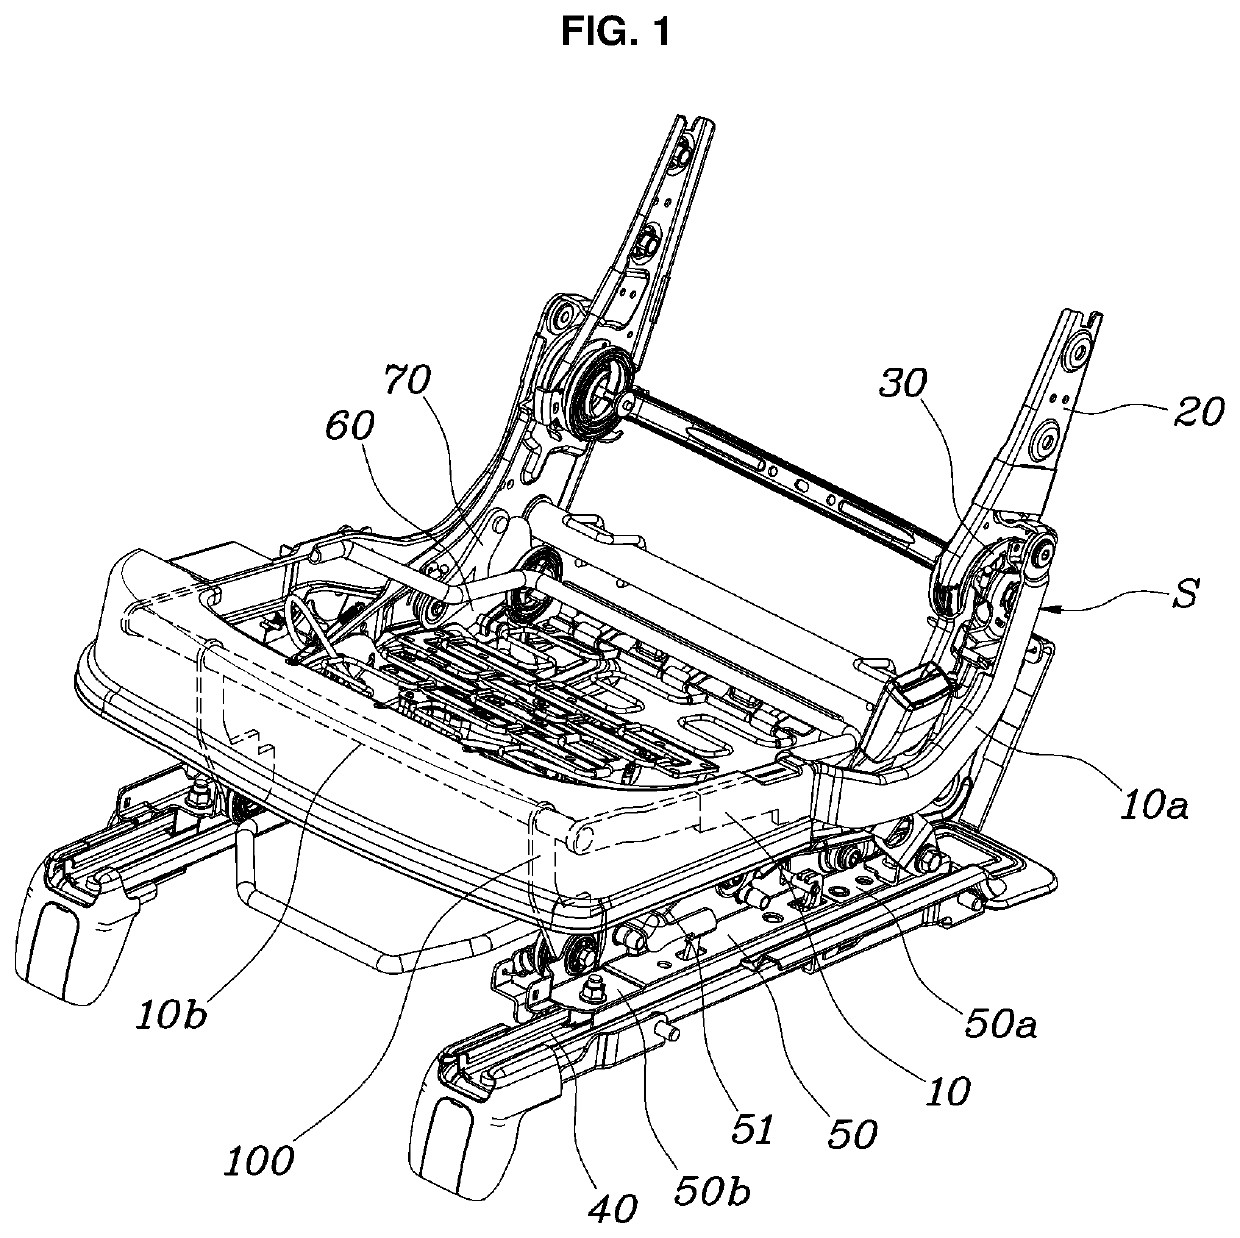 Walk-in apparatus for vehicular seat